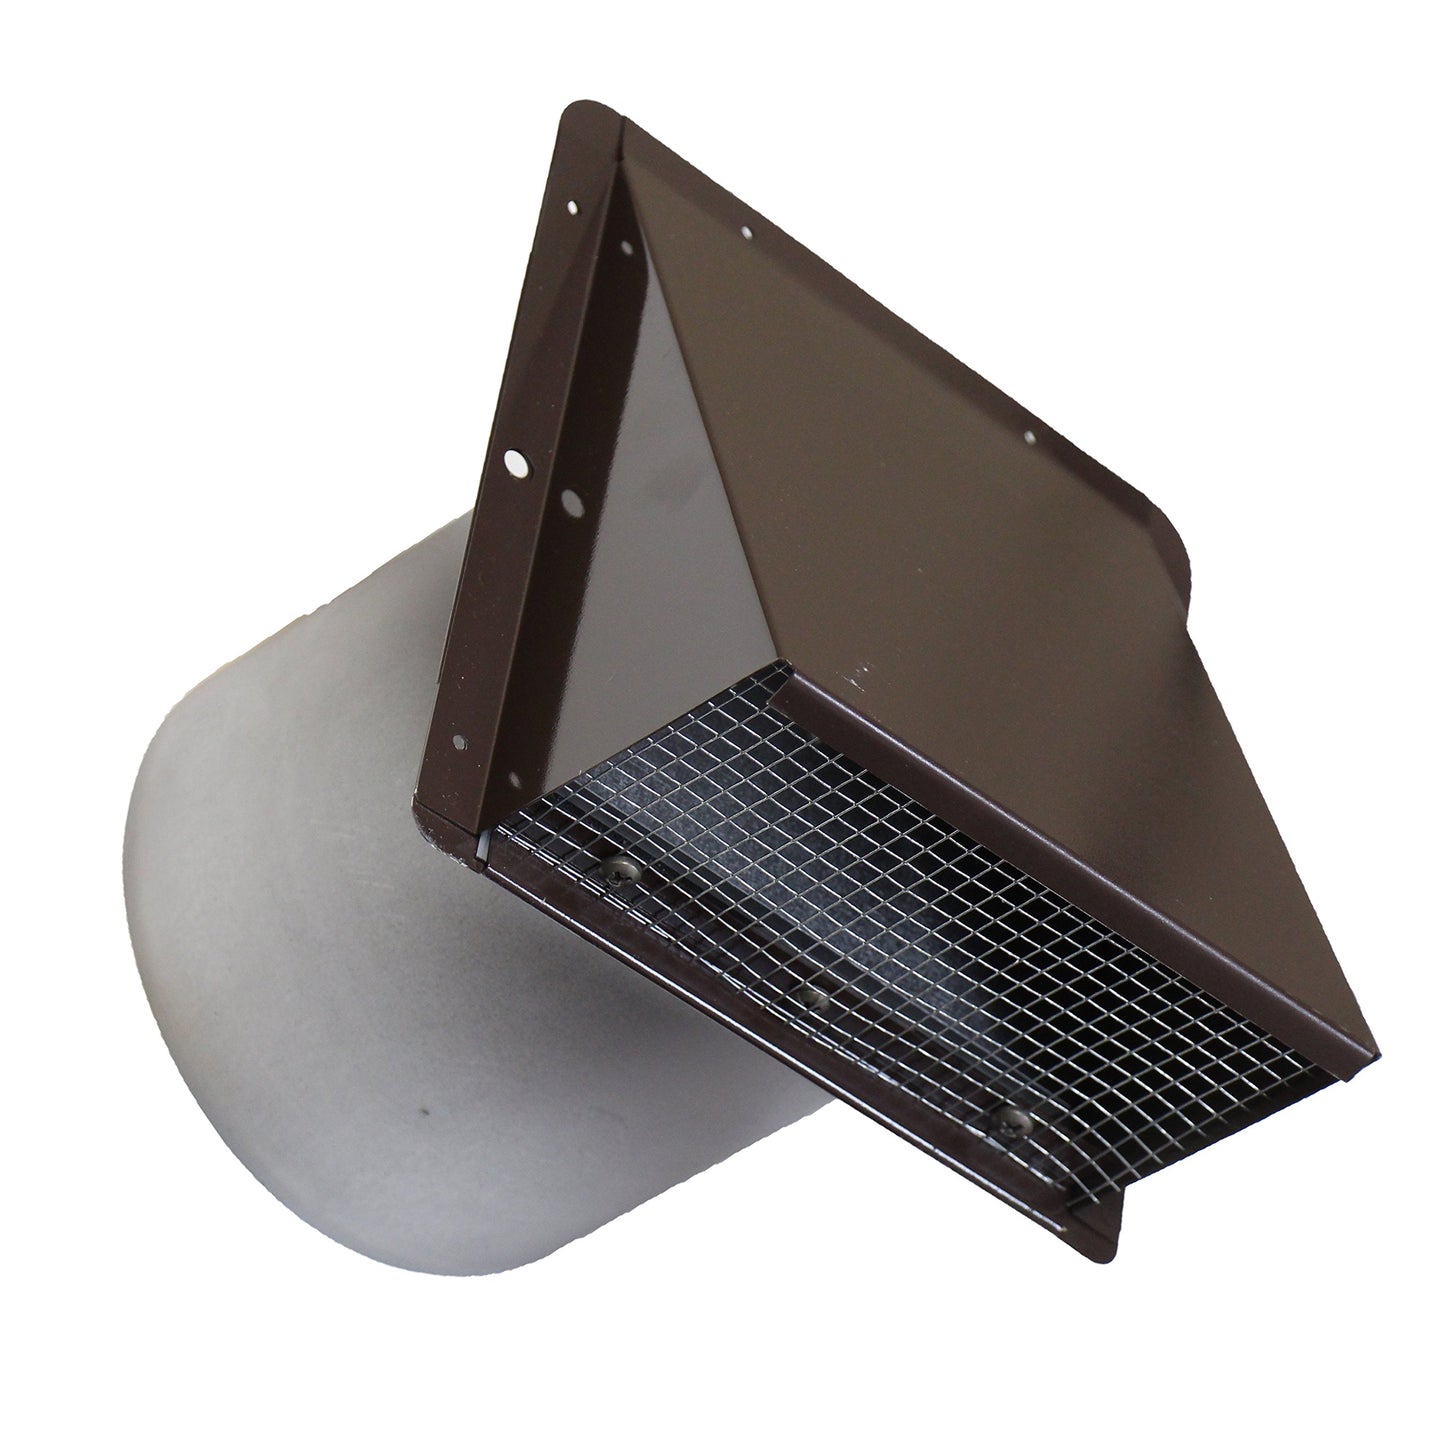 Reversomatic 6" Heavy Duty Exhaust Wall Cap with Damper and Bird Screen